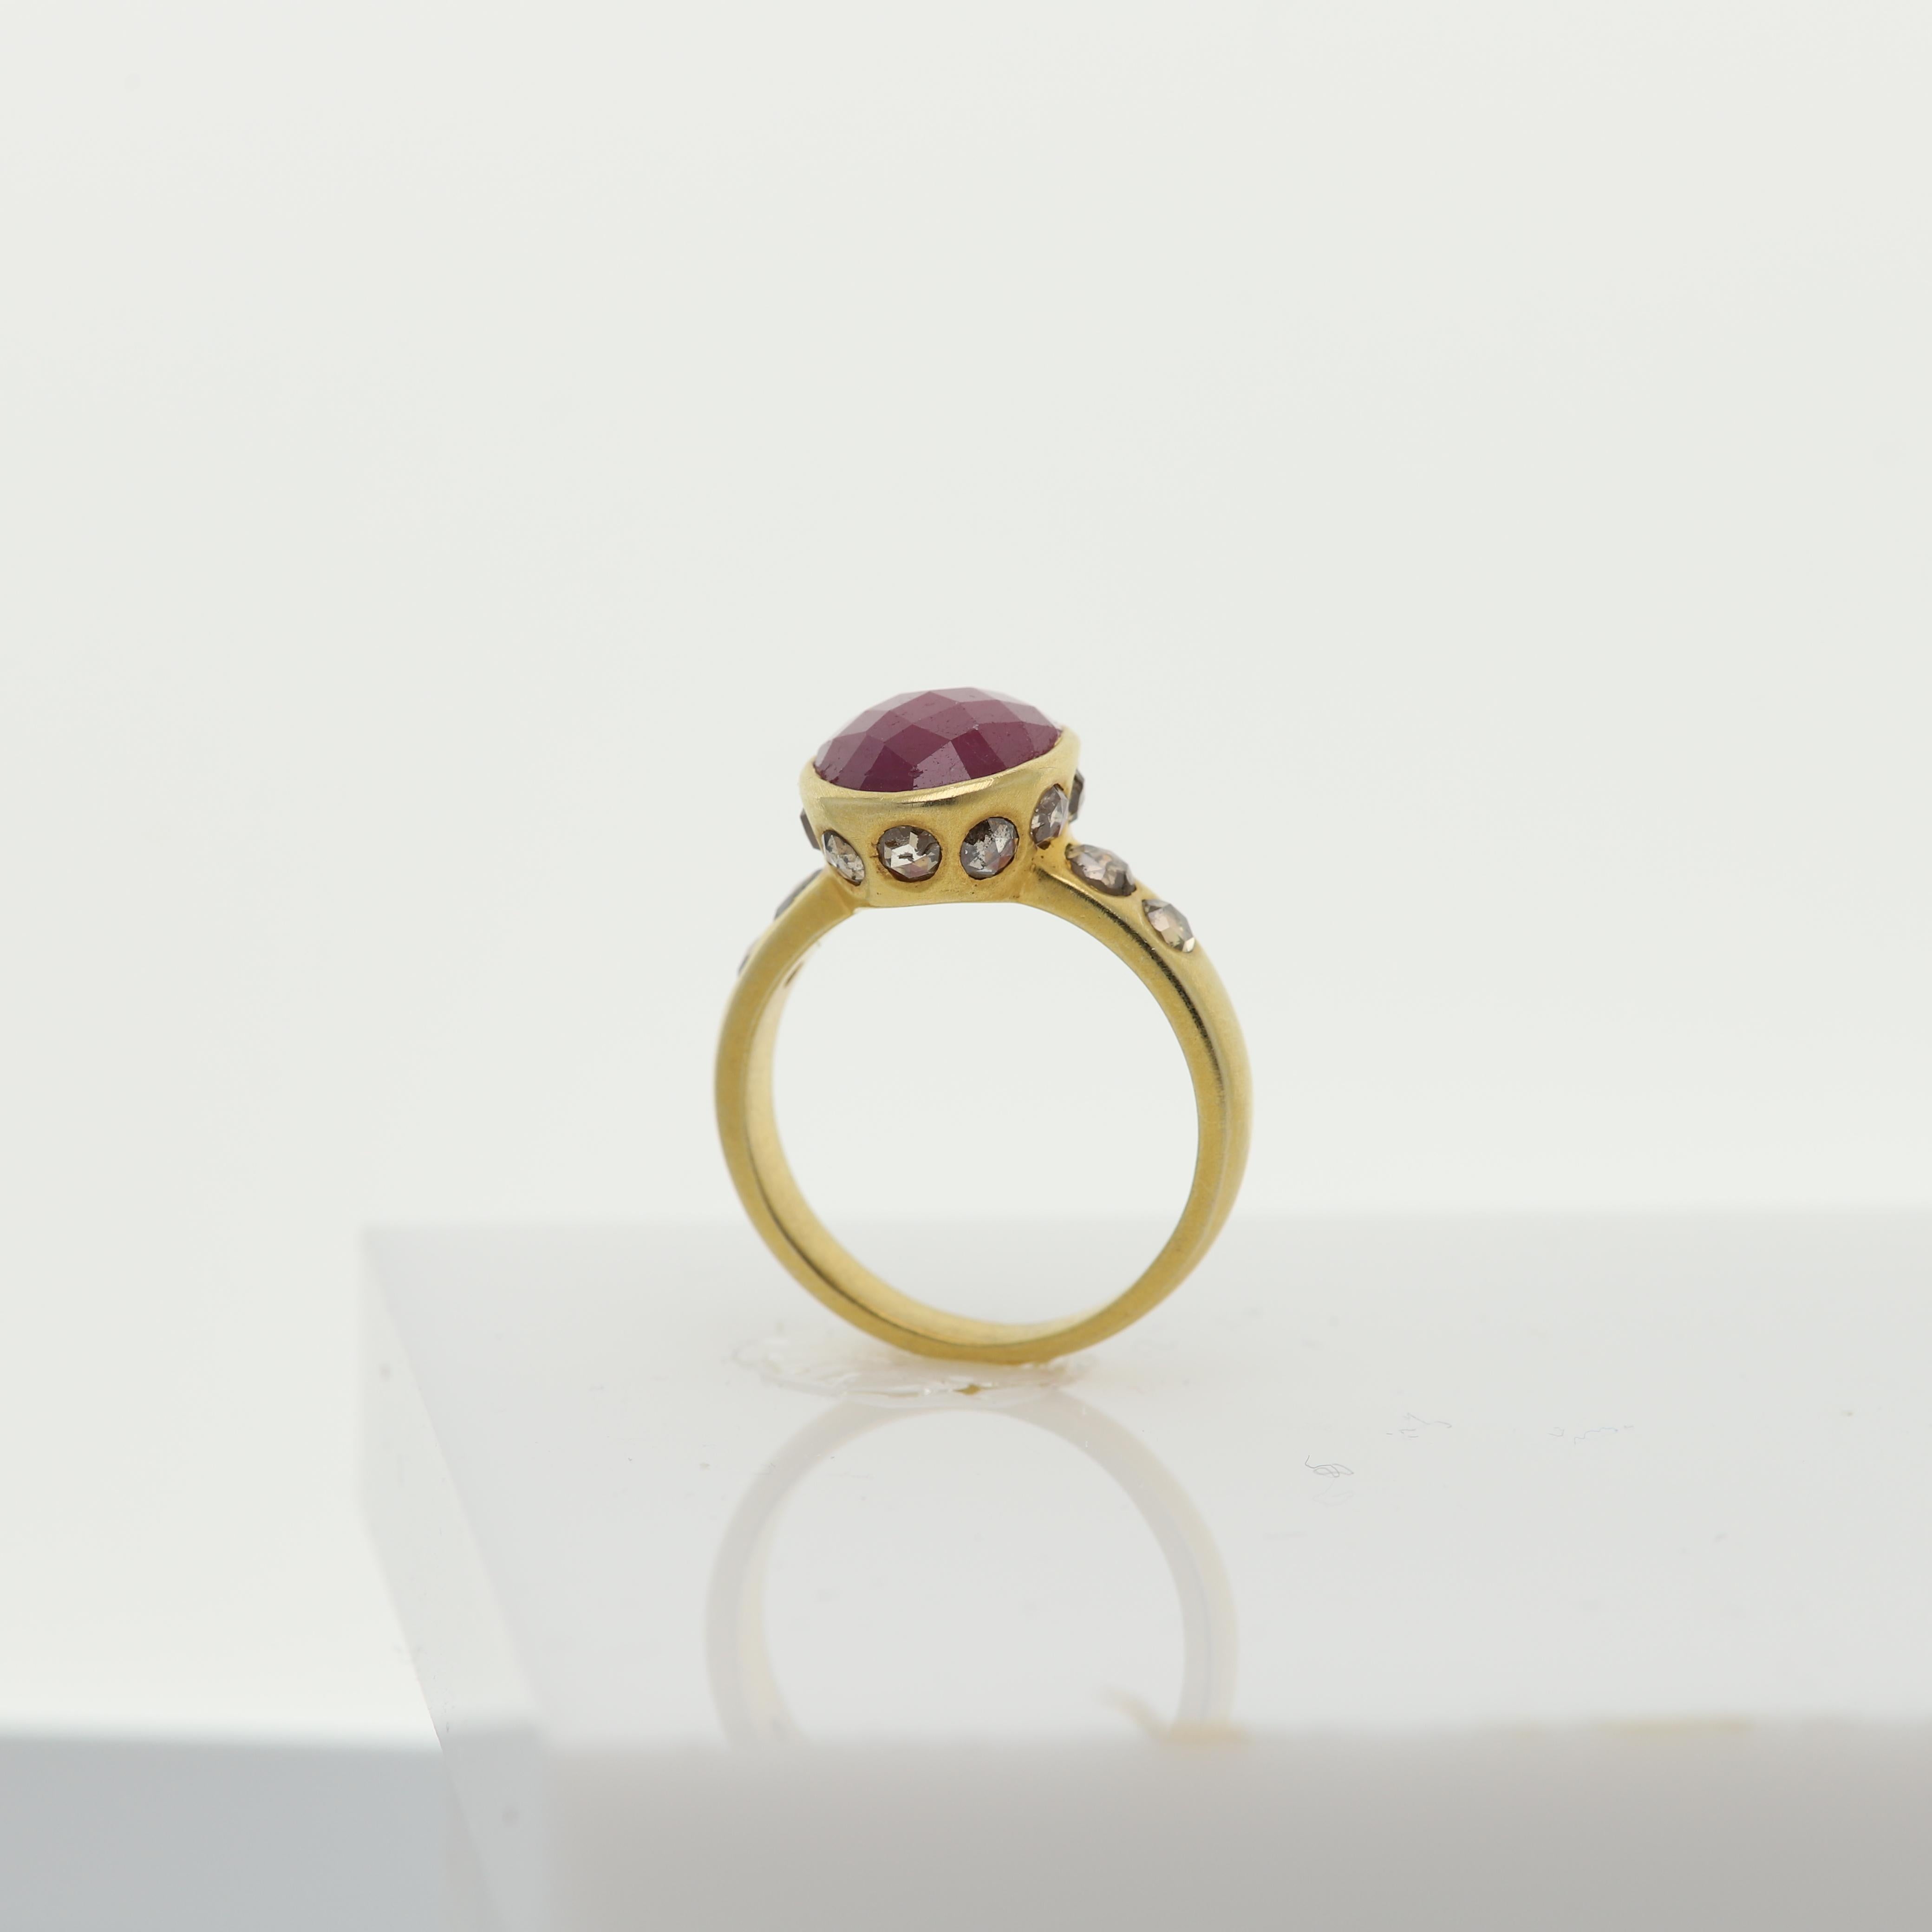 4.0 Ct Ruby Vintage Ring 18k Yellow Gold Oval Ruby & Old Cut Diamonds Ring For Sale 2